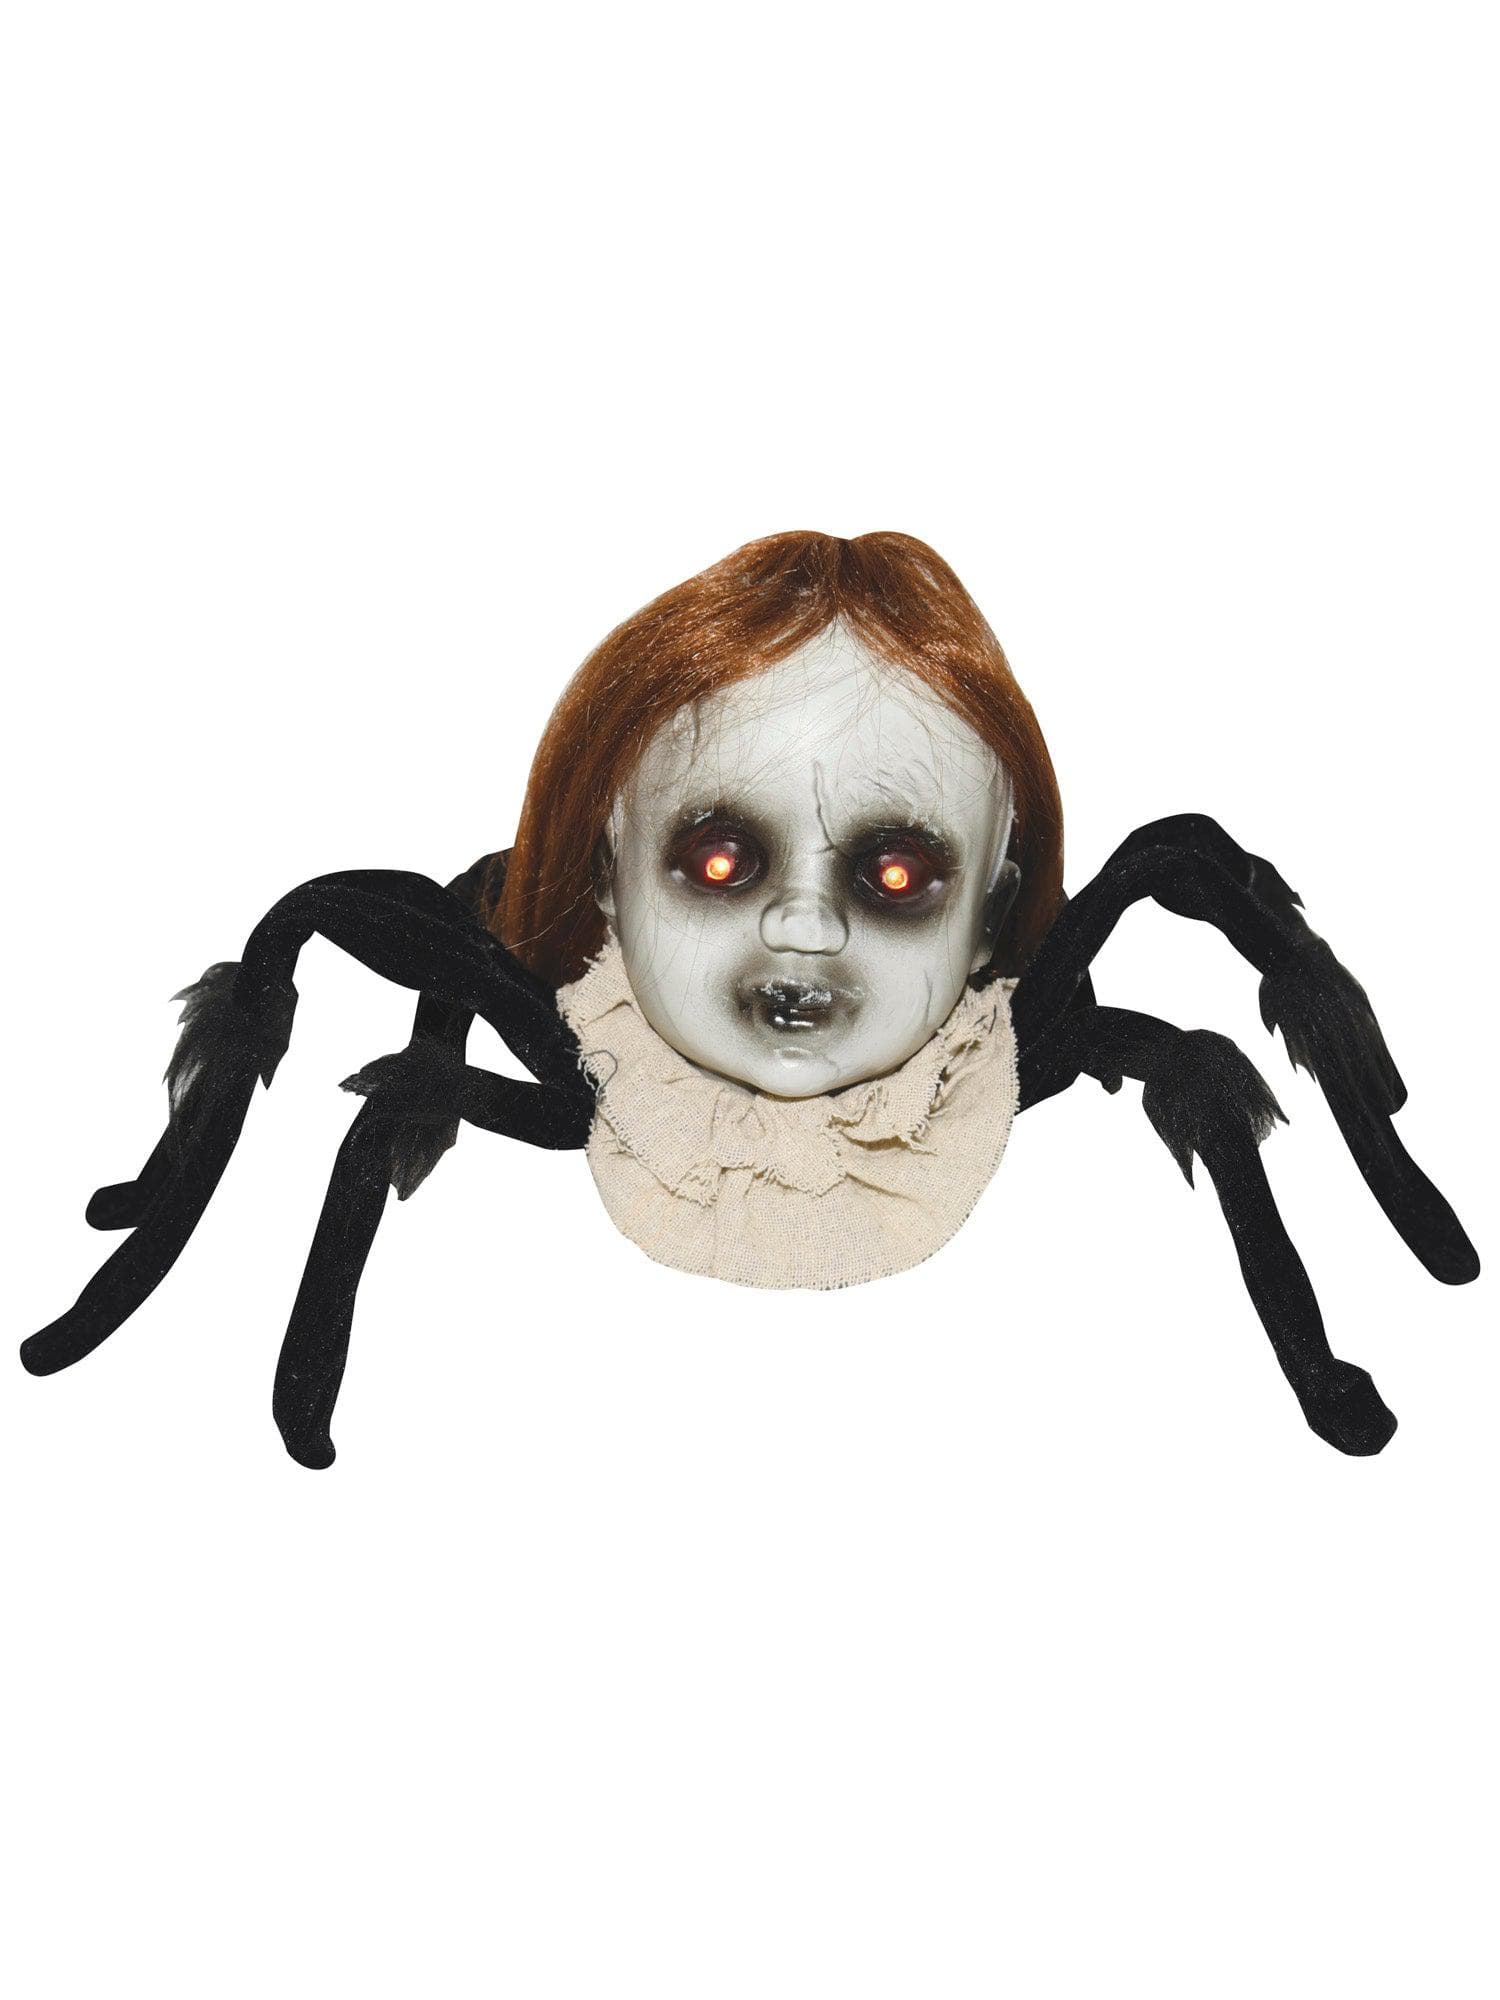 20 Inch Shaking Spider Girl Light Up Animated Prop - costumes.com